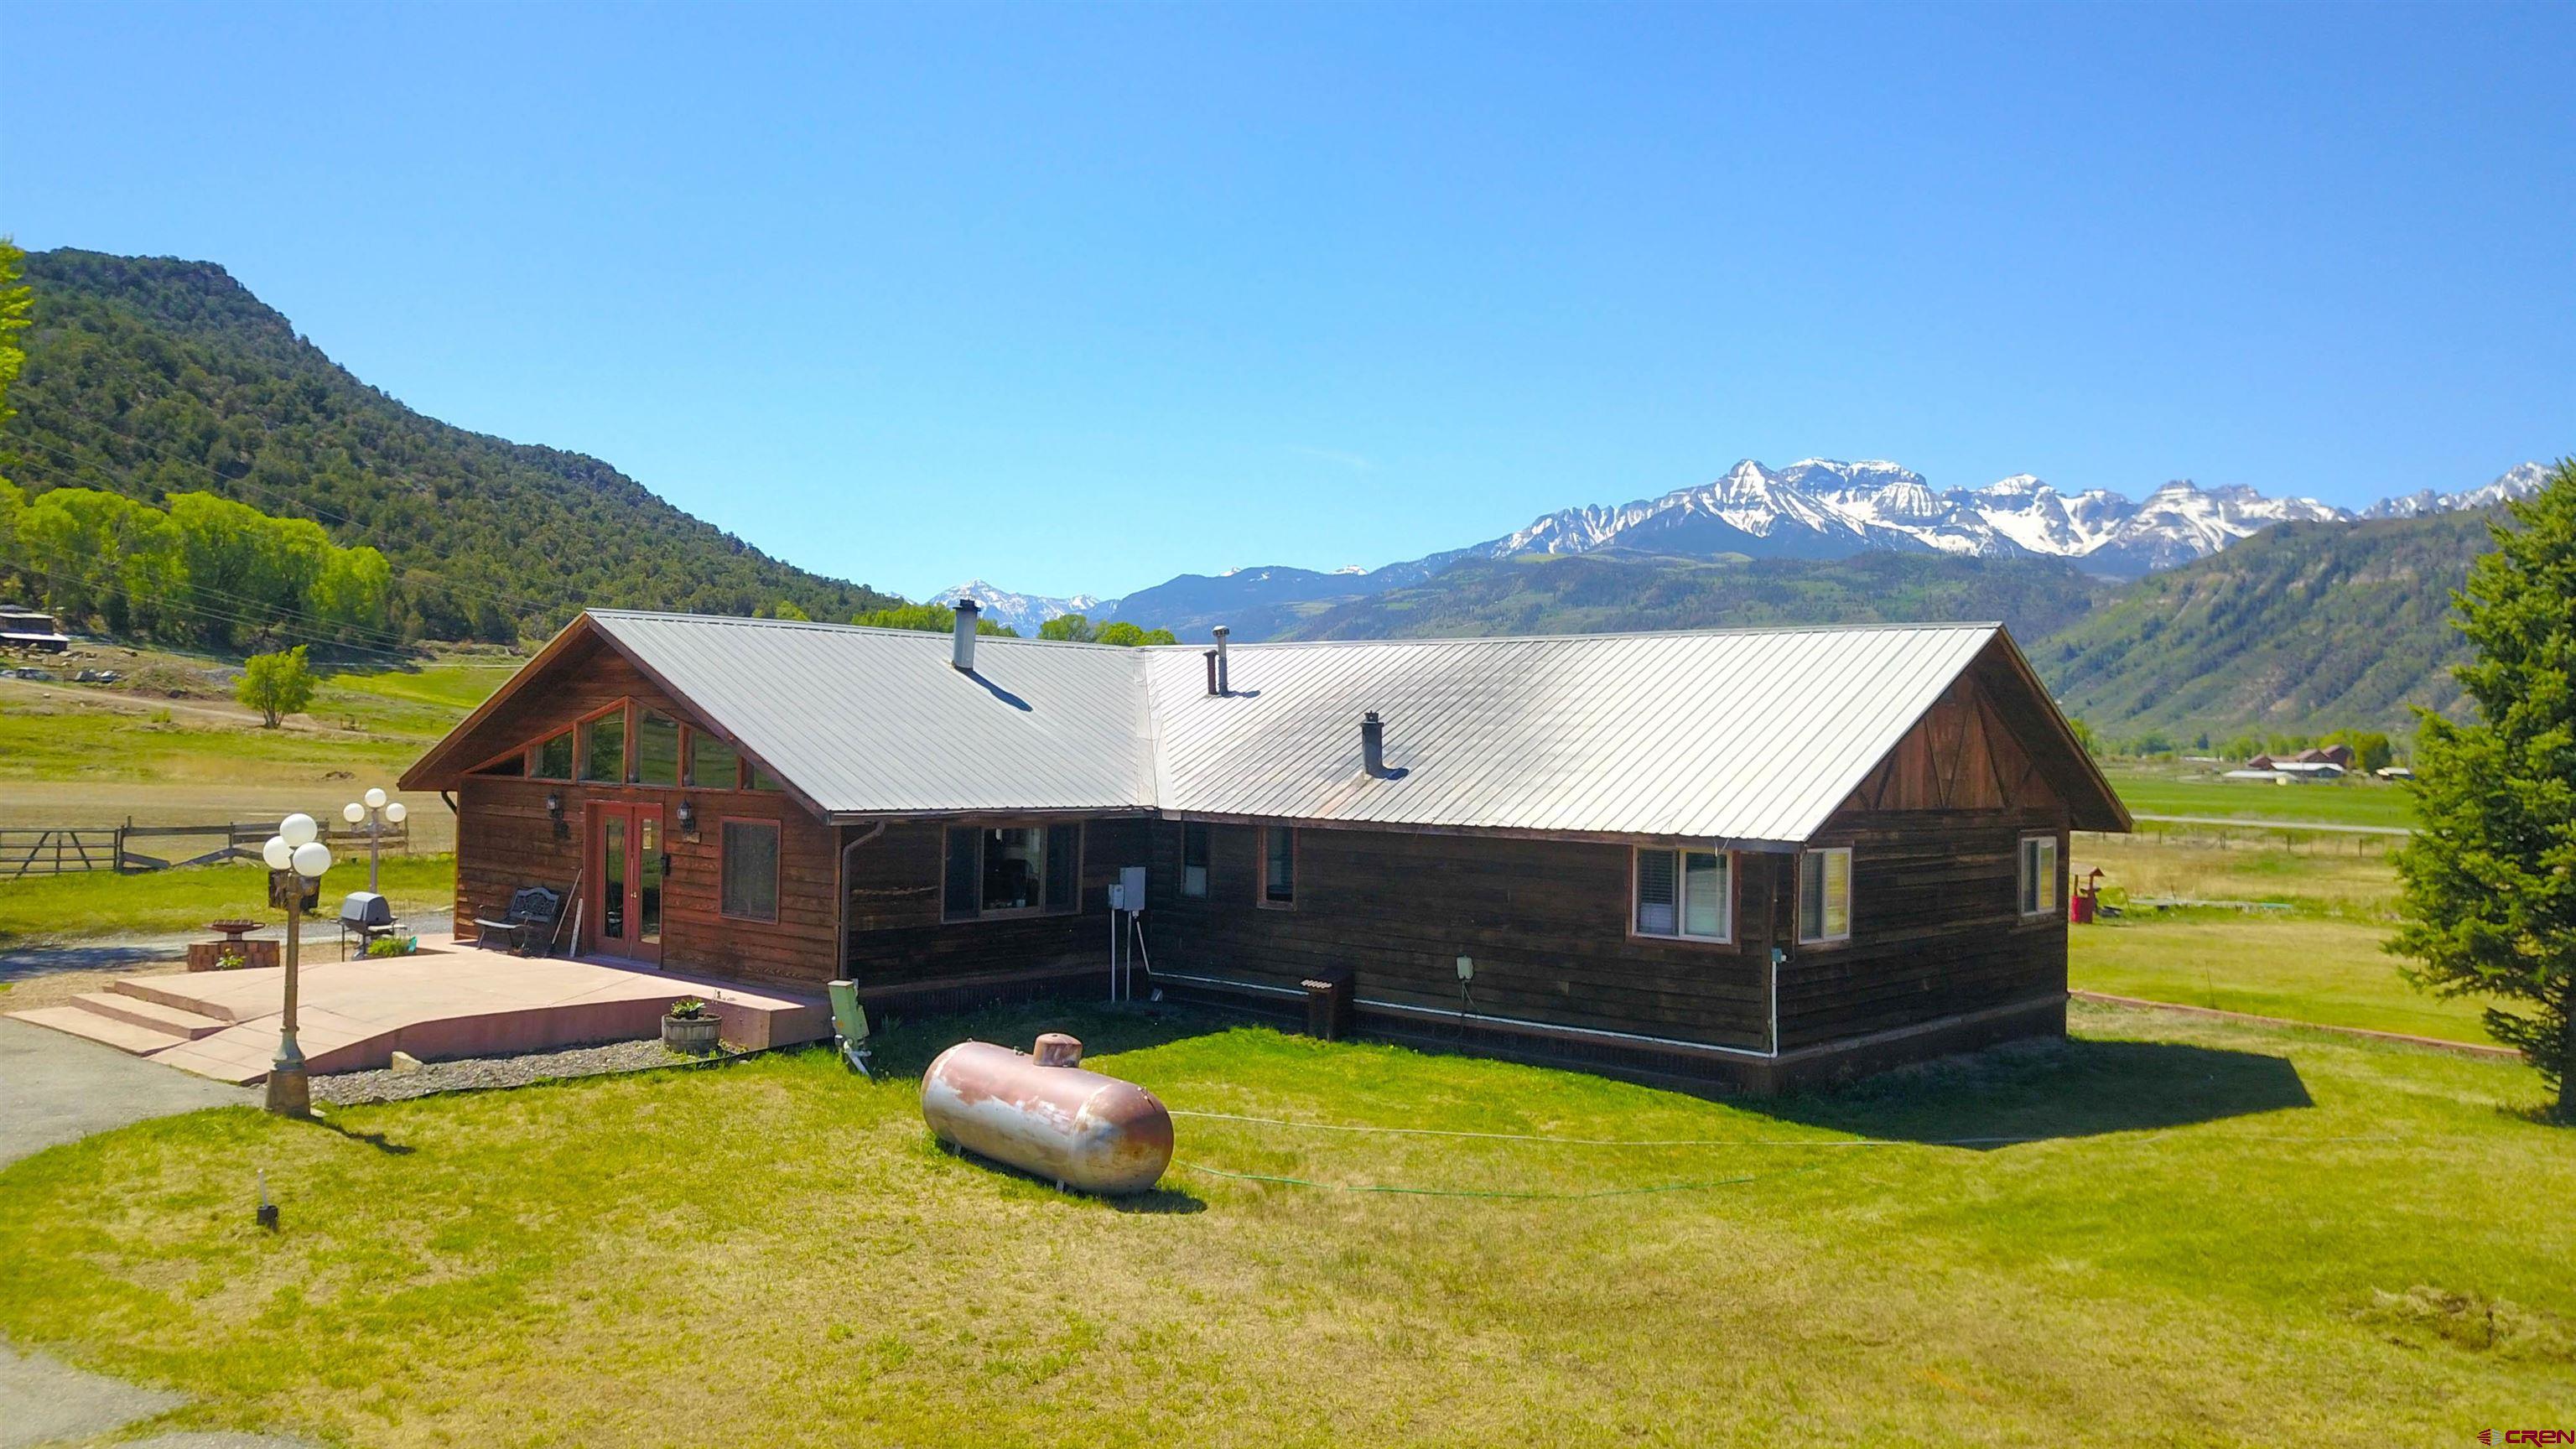 10 Acres just outside of Ridgway.  3 Bedrooms, 3 Bathrooms with main level living. 9 Acres of Irrigation with in your face Mt. Sneffles and San Juan views. 80 ft x 100 ft shop with plenty of room for all of your toys. No Covenants or HOA allowing one to do what they please. Propane Forced Air heat, along with back up coal fired furnace and wood burning stove. So many potential uses for this property!